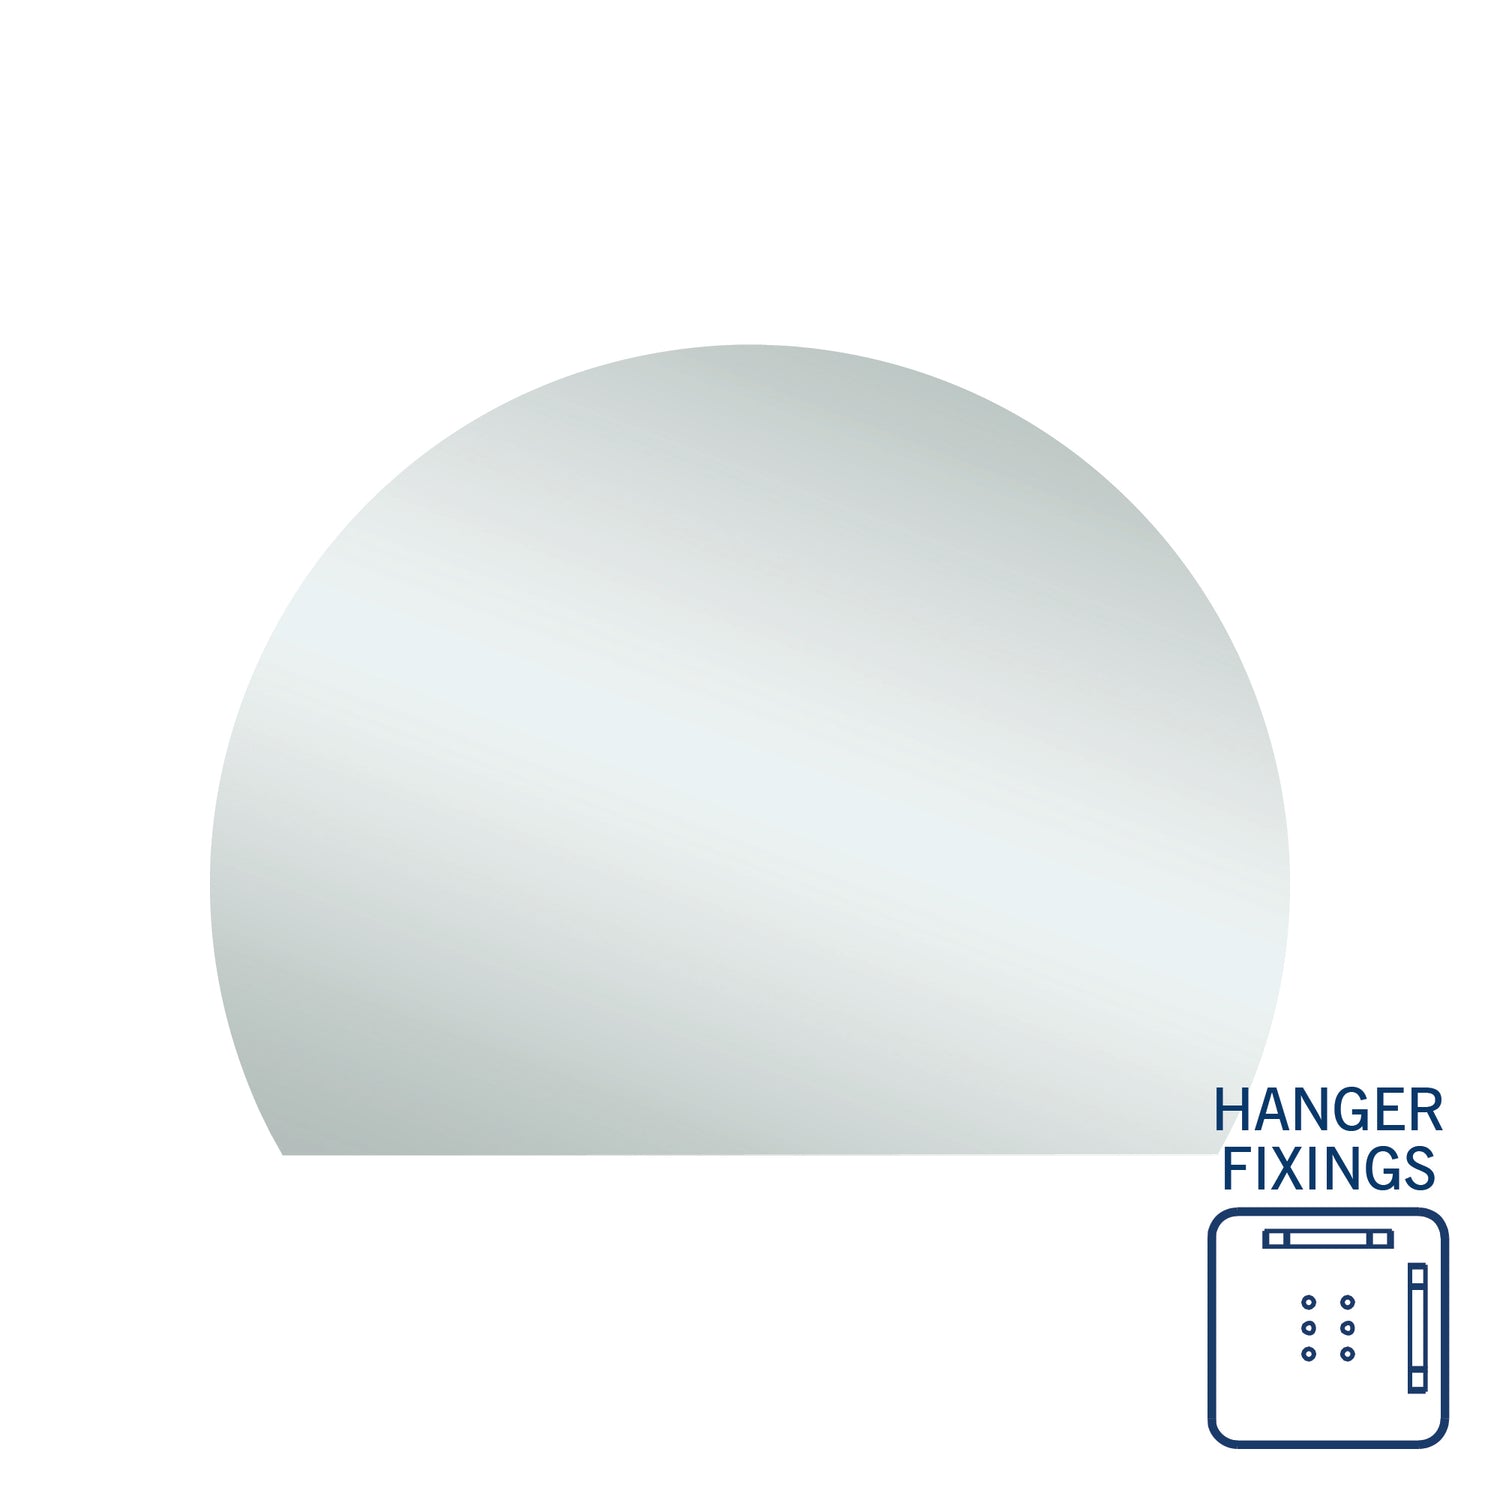 Thermogroup Hamilton D Shaped Polished Edge Mirror 1200x900x14mm, with Hangers